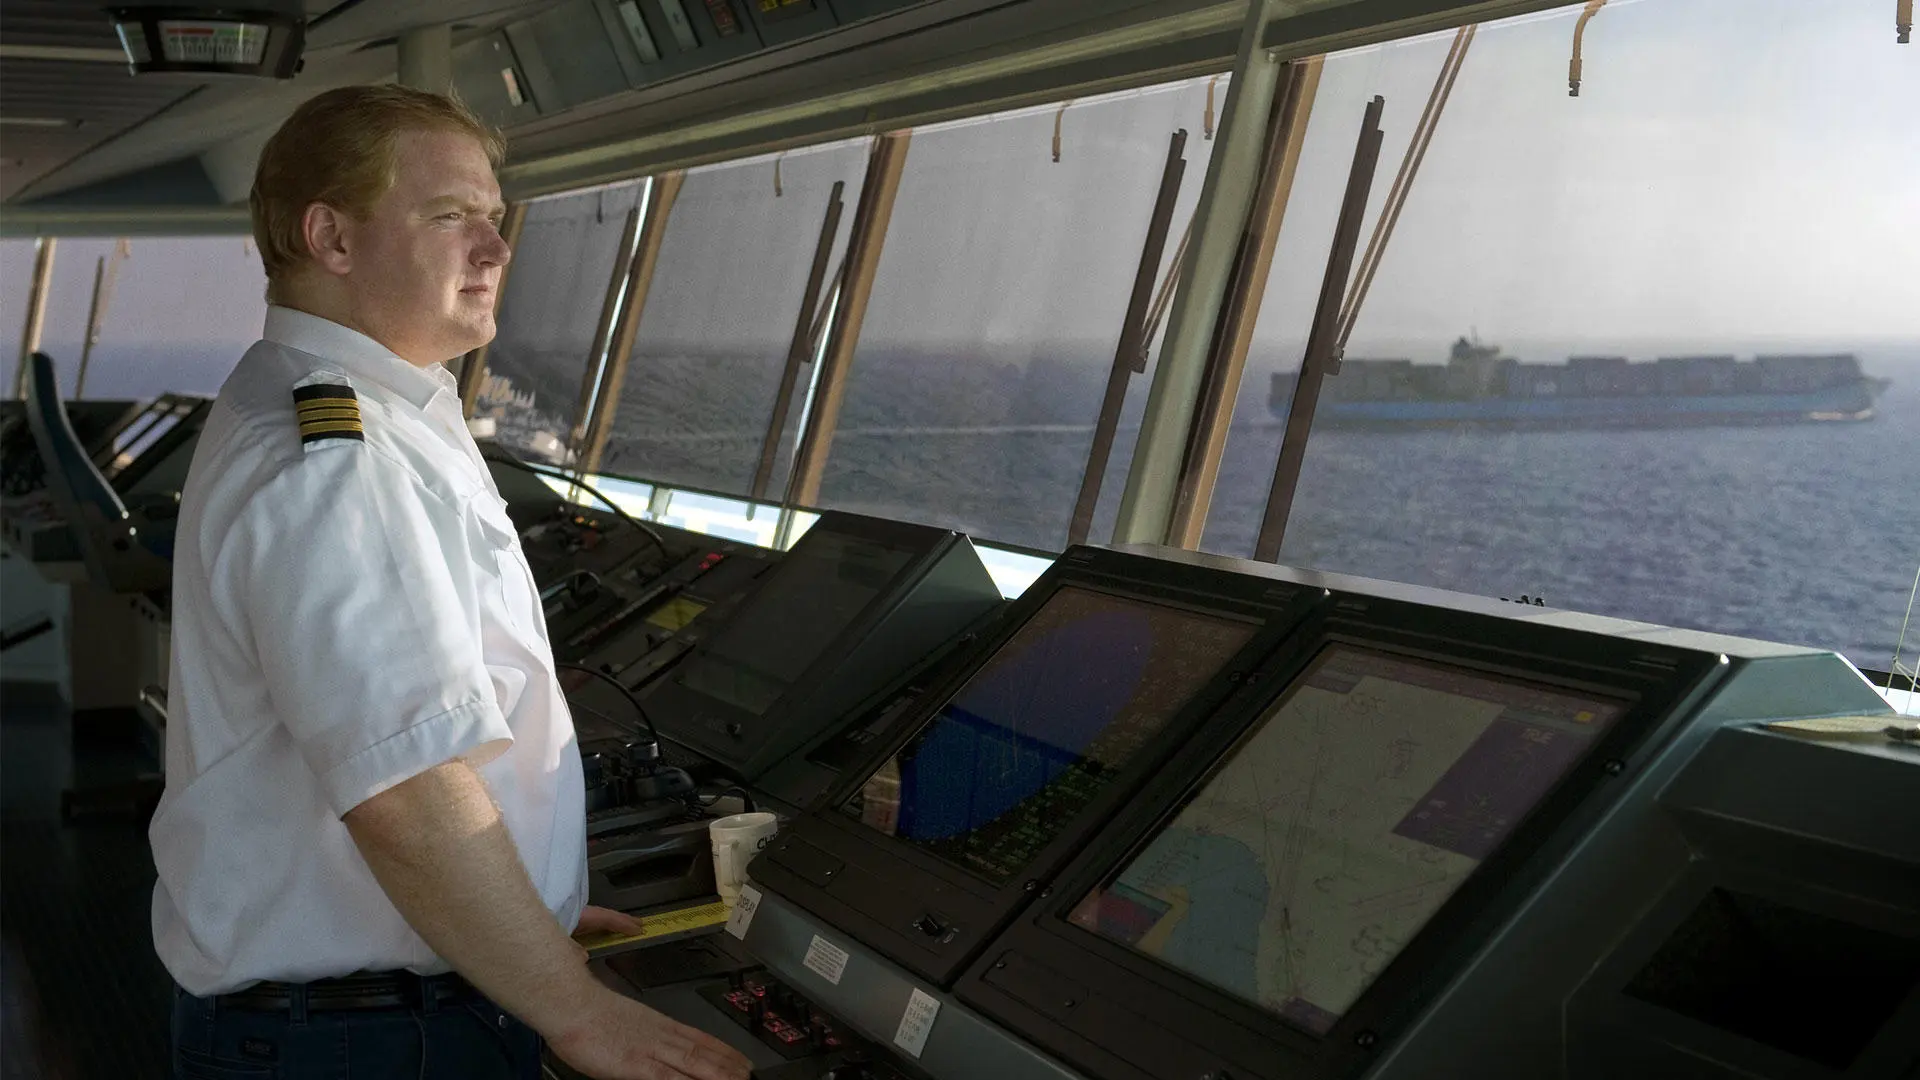 A ship's captain on the bridge looking out the windows